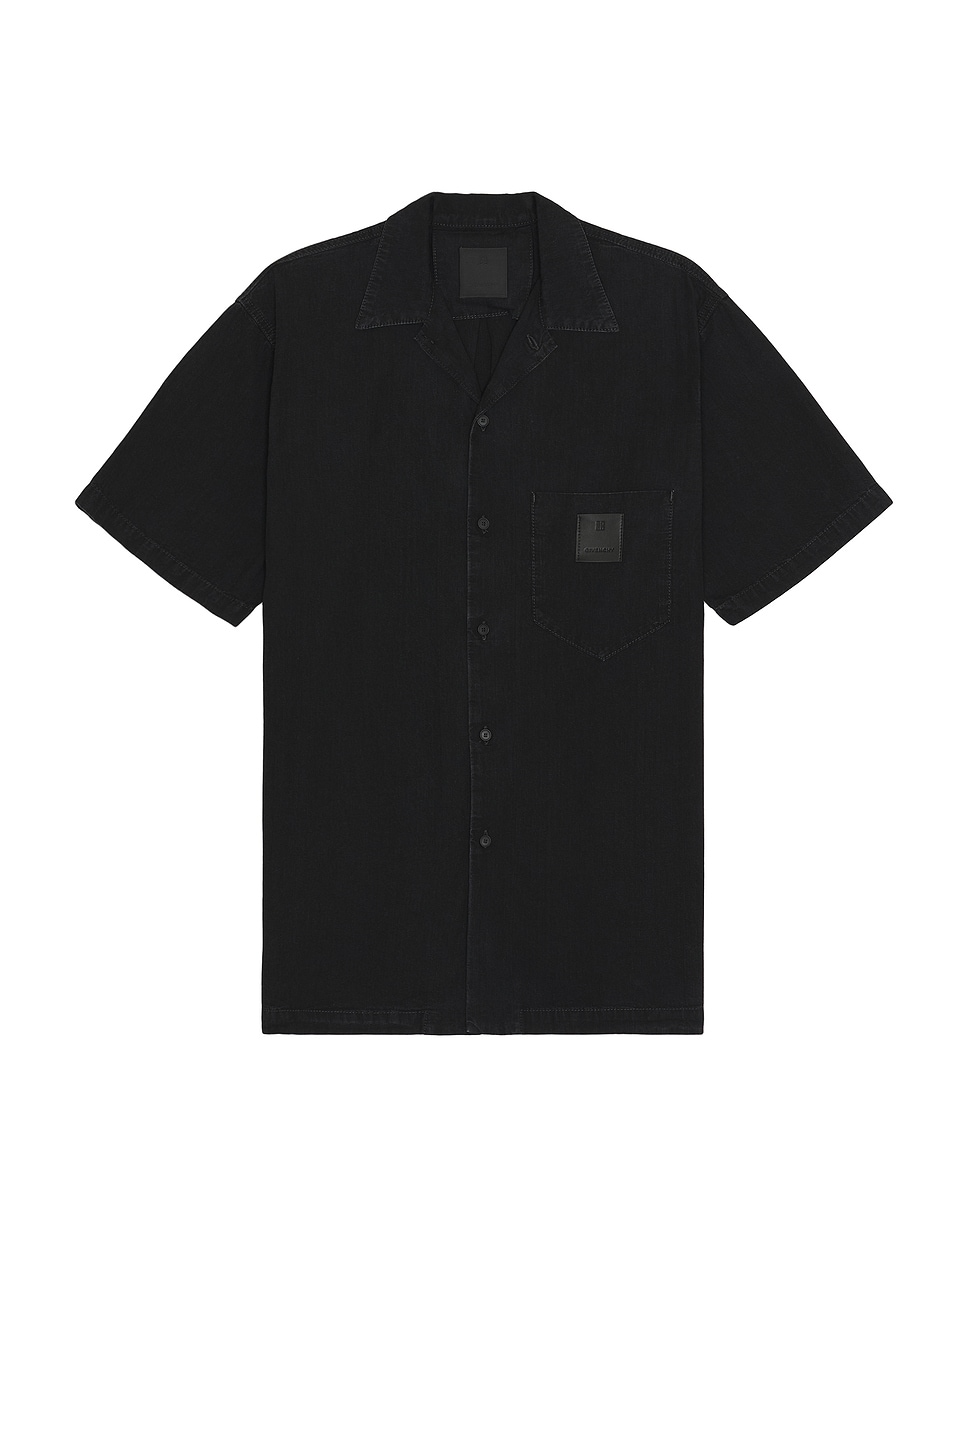 Image 1 of Givenchy Branded Short Sleeve Shirt in Black